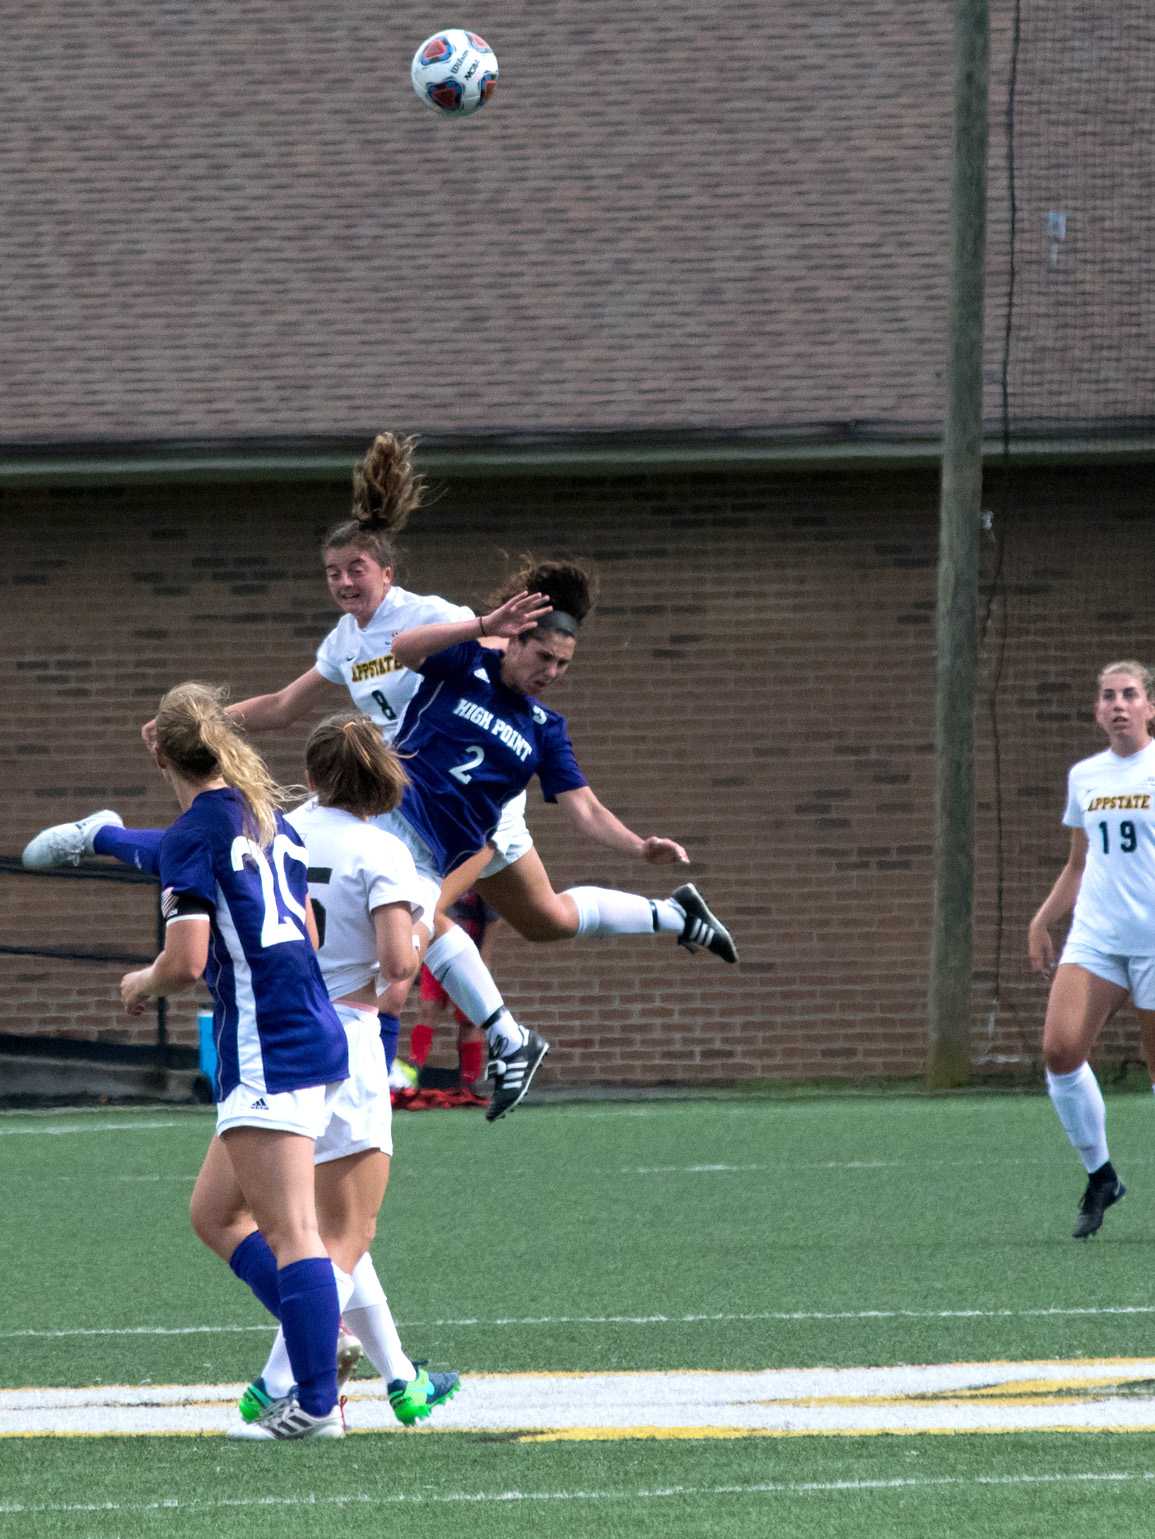 Senior Lindsey Tully jumps to try and get contact with the ball and gain possestion against High Point.